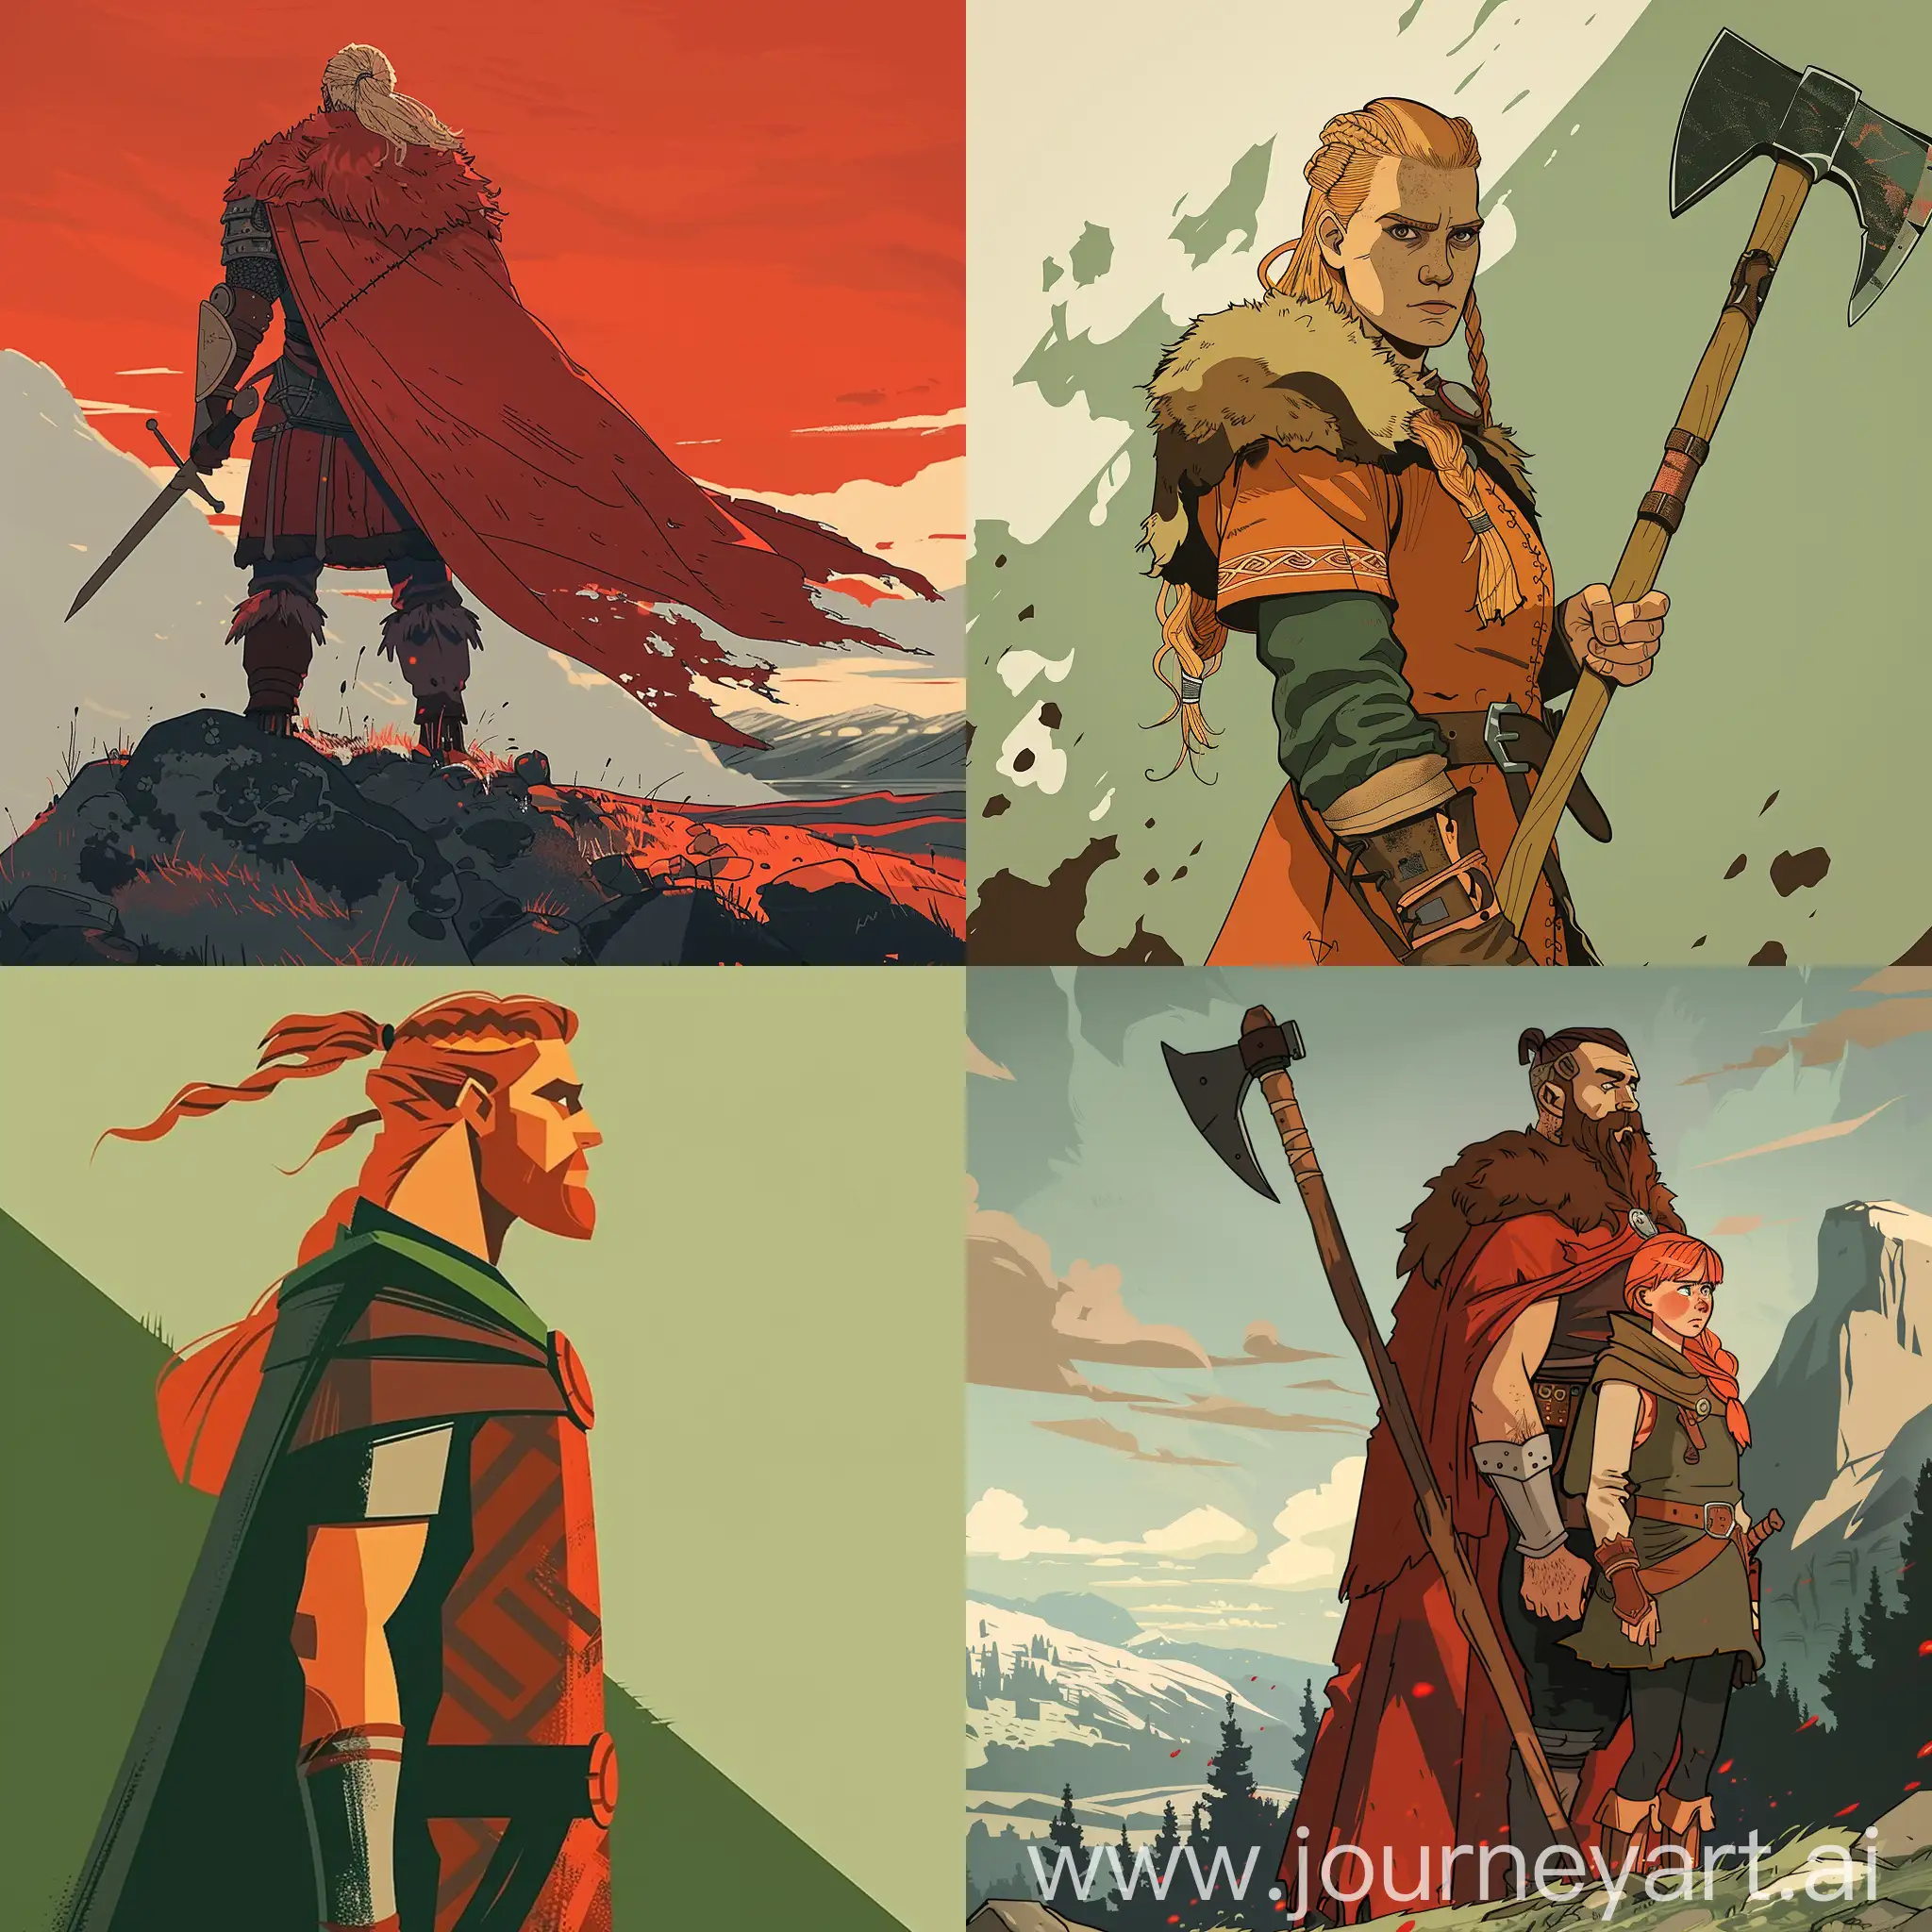 flat, mate, simple, minimalist, cel shaded, thick outline, person in the style of Gil Elvgren and Banner Saga